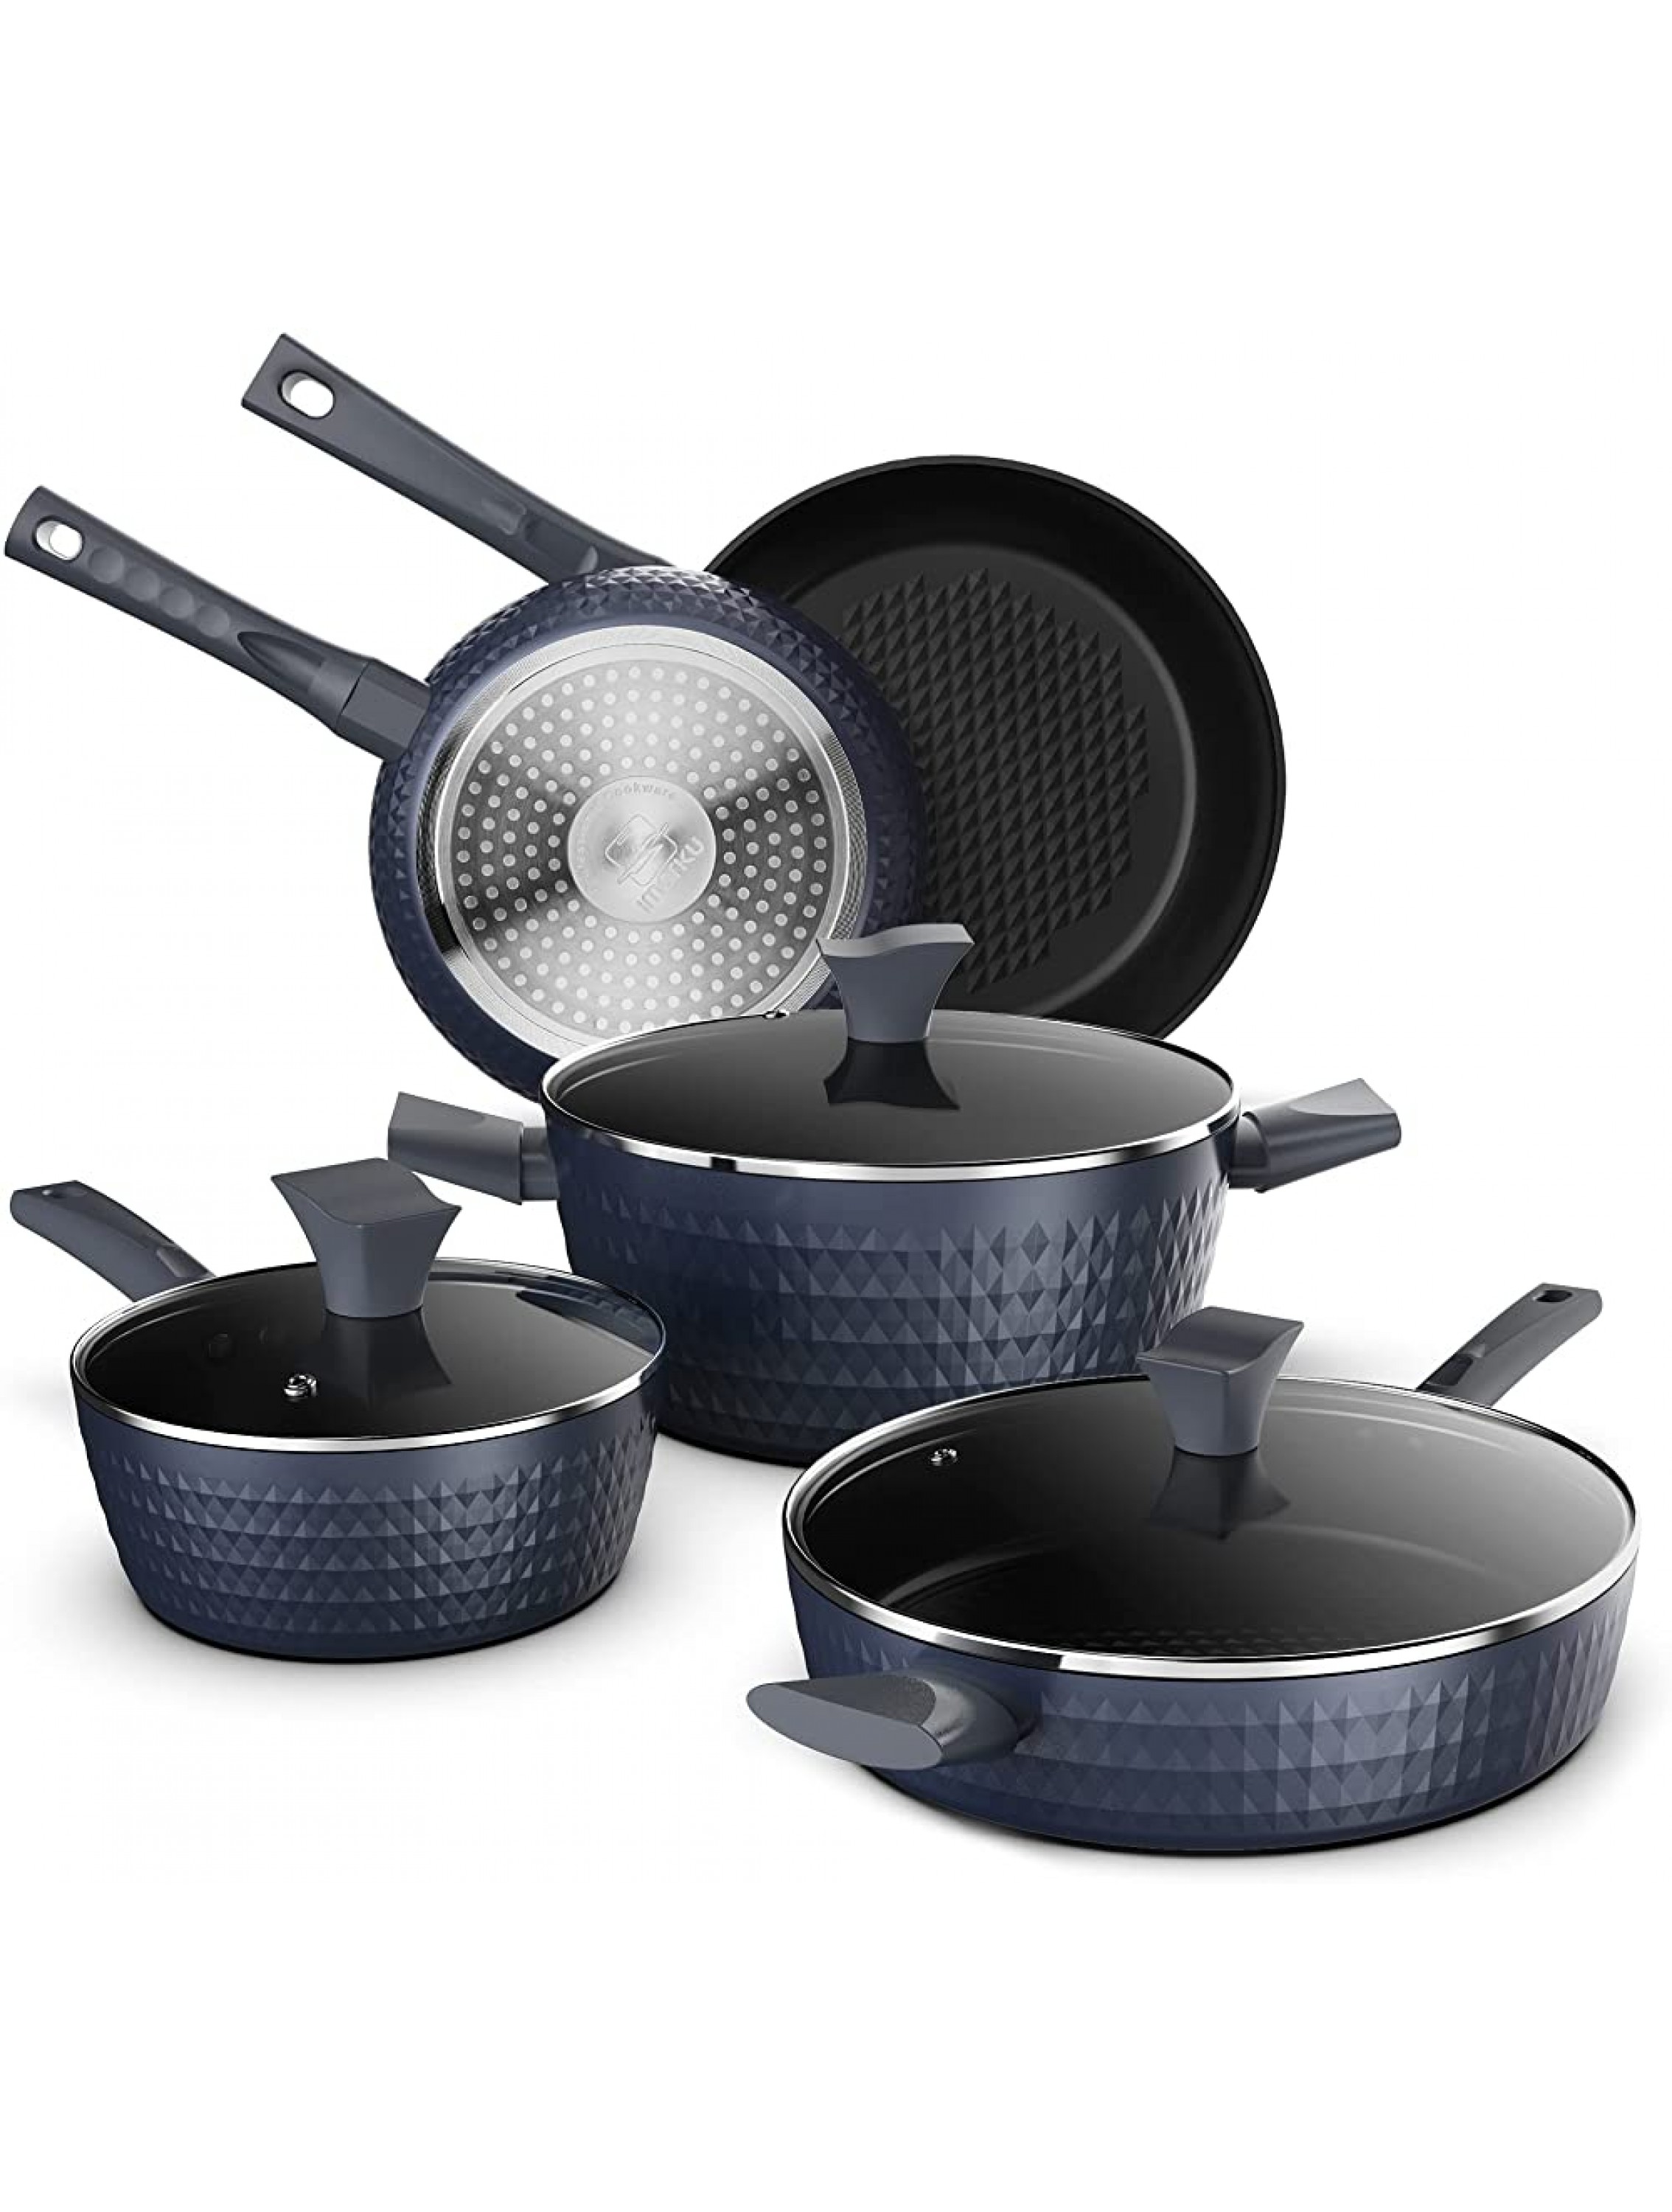 imarku Kitchen Cookware Sets 8-Piece Pots and Pans Set Nonstick with Diamond Surface Induction Cookware Cooking Pots and Pans Oven Safe Blue - B947P1850